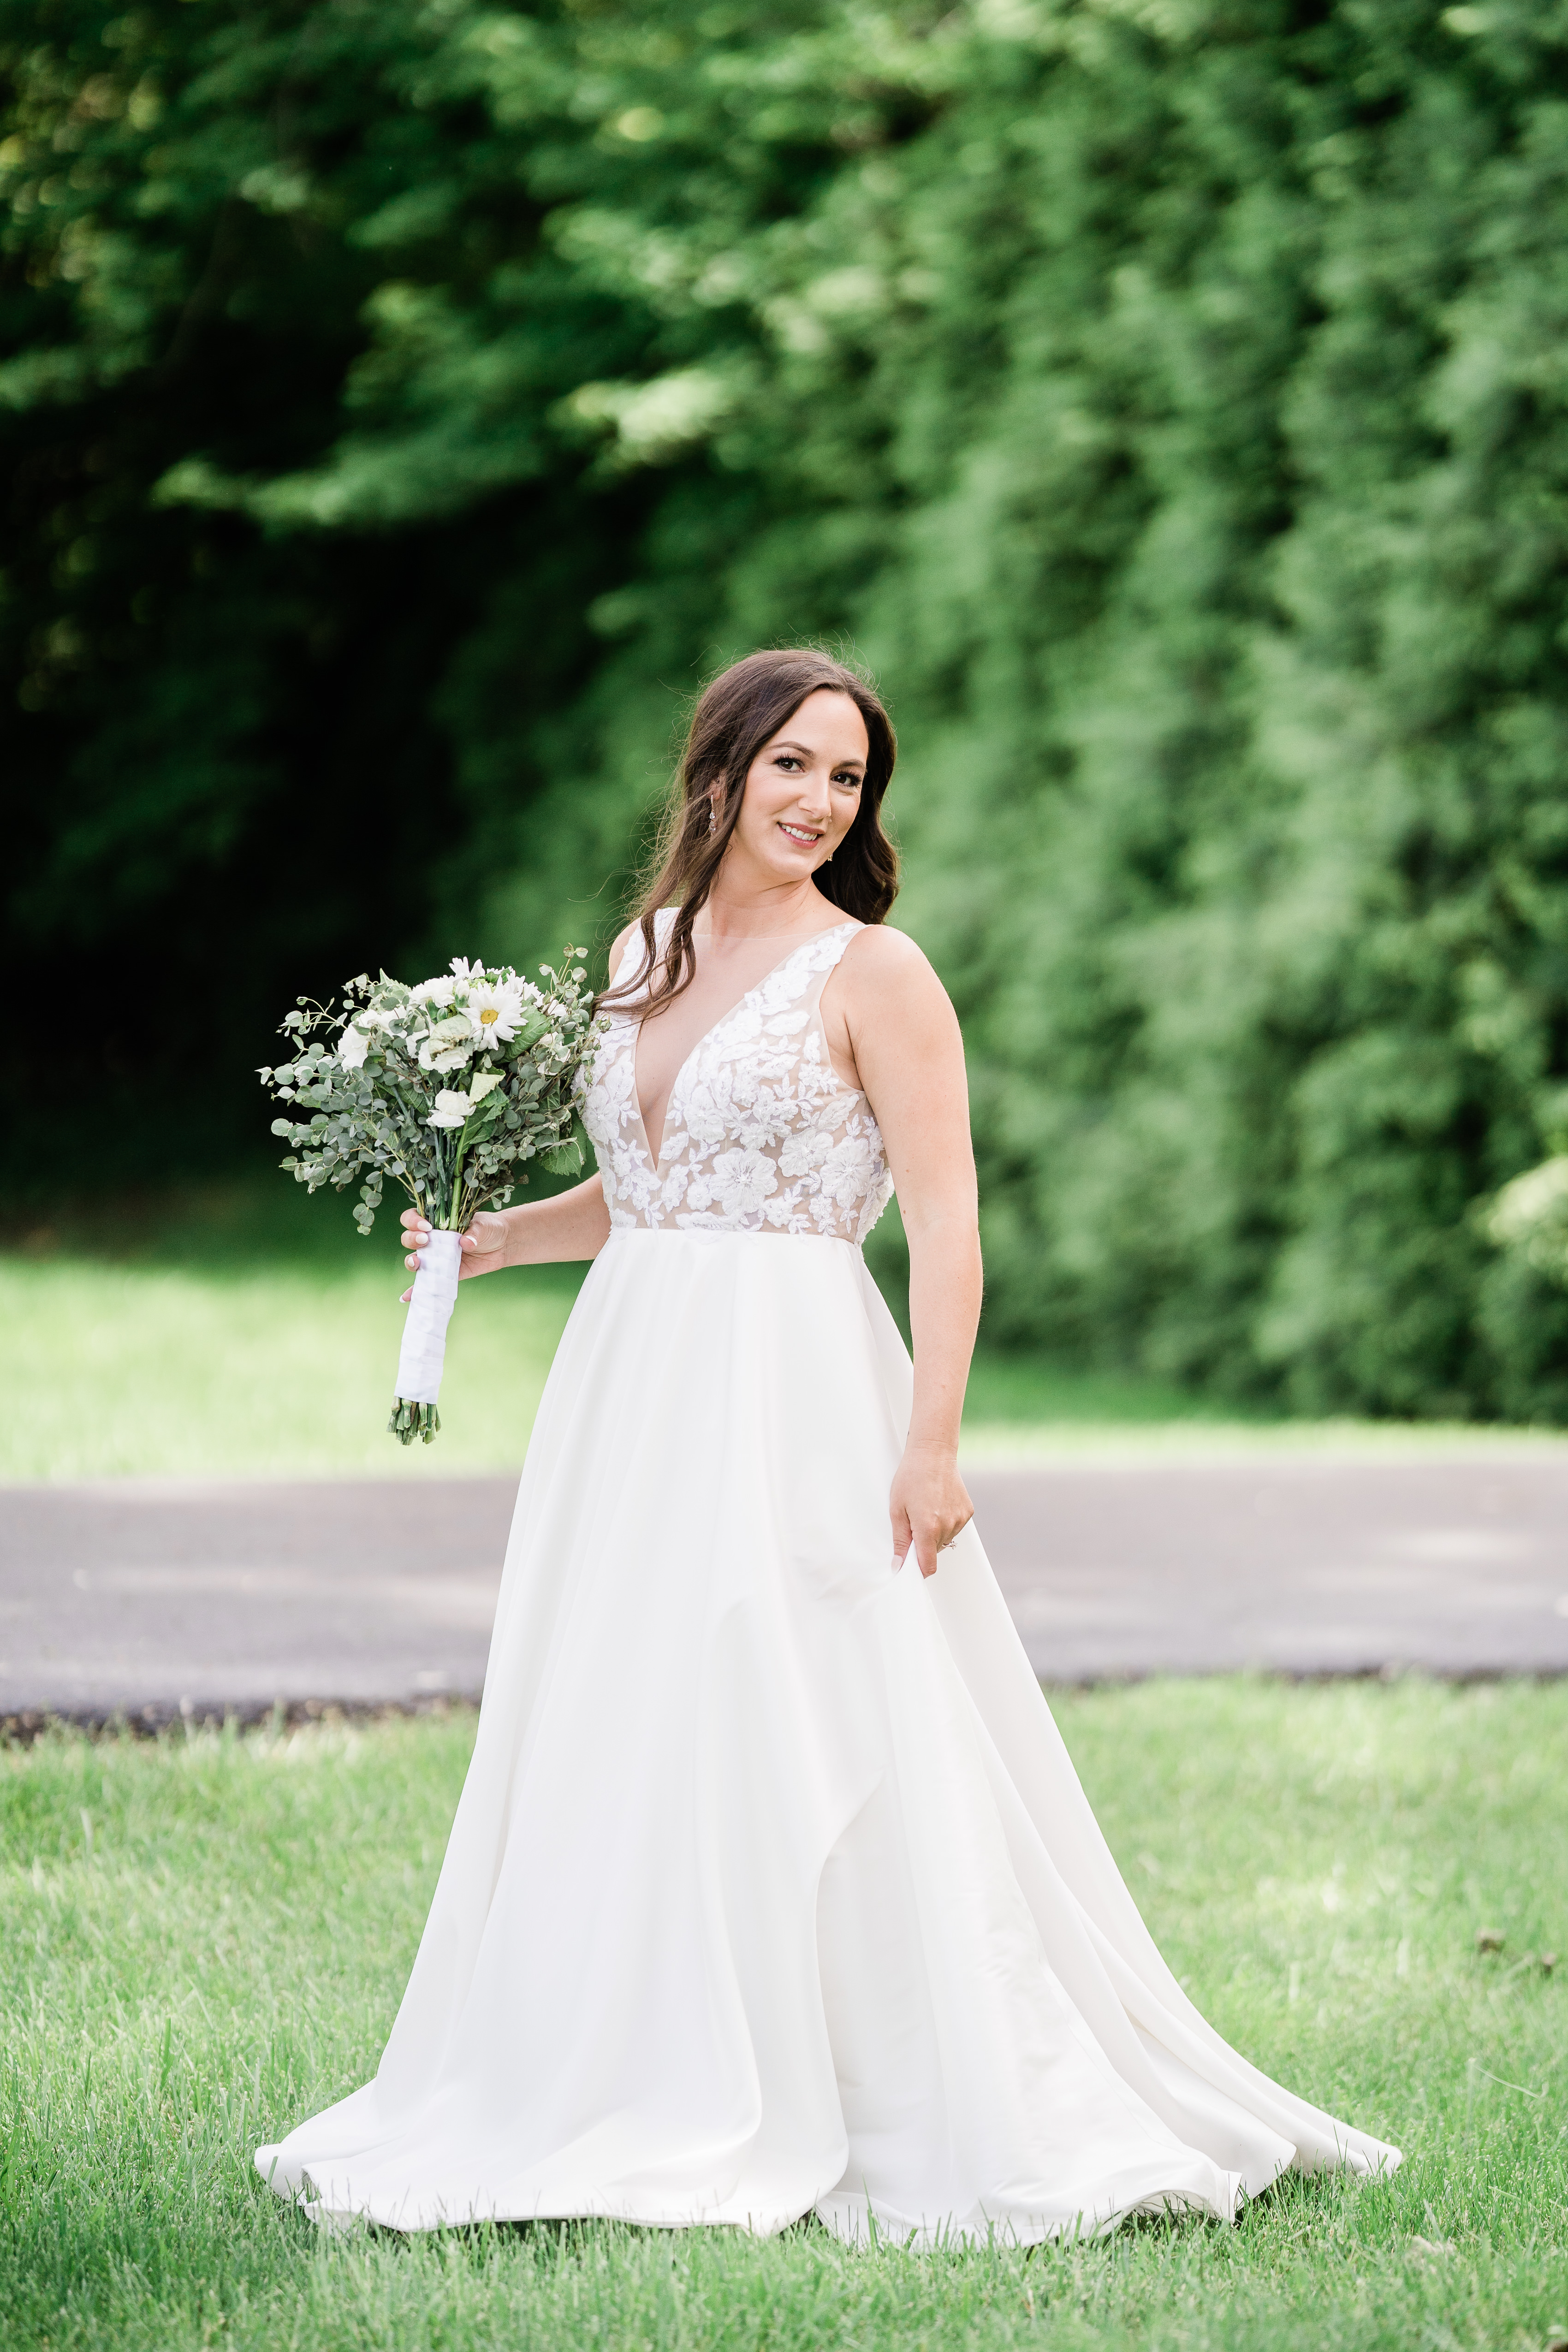 bridal picture with bride in a low v neck wedding dress walking through a lawn while holding her white wedding bouquet